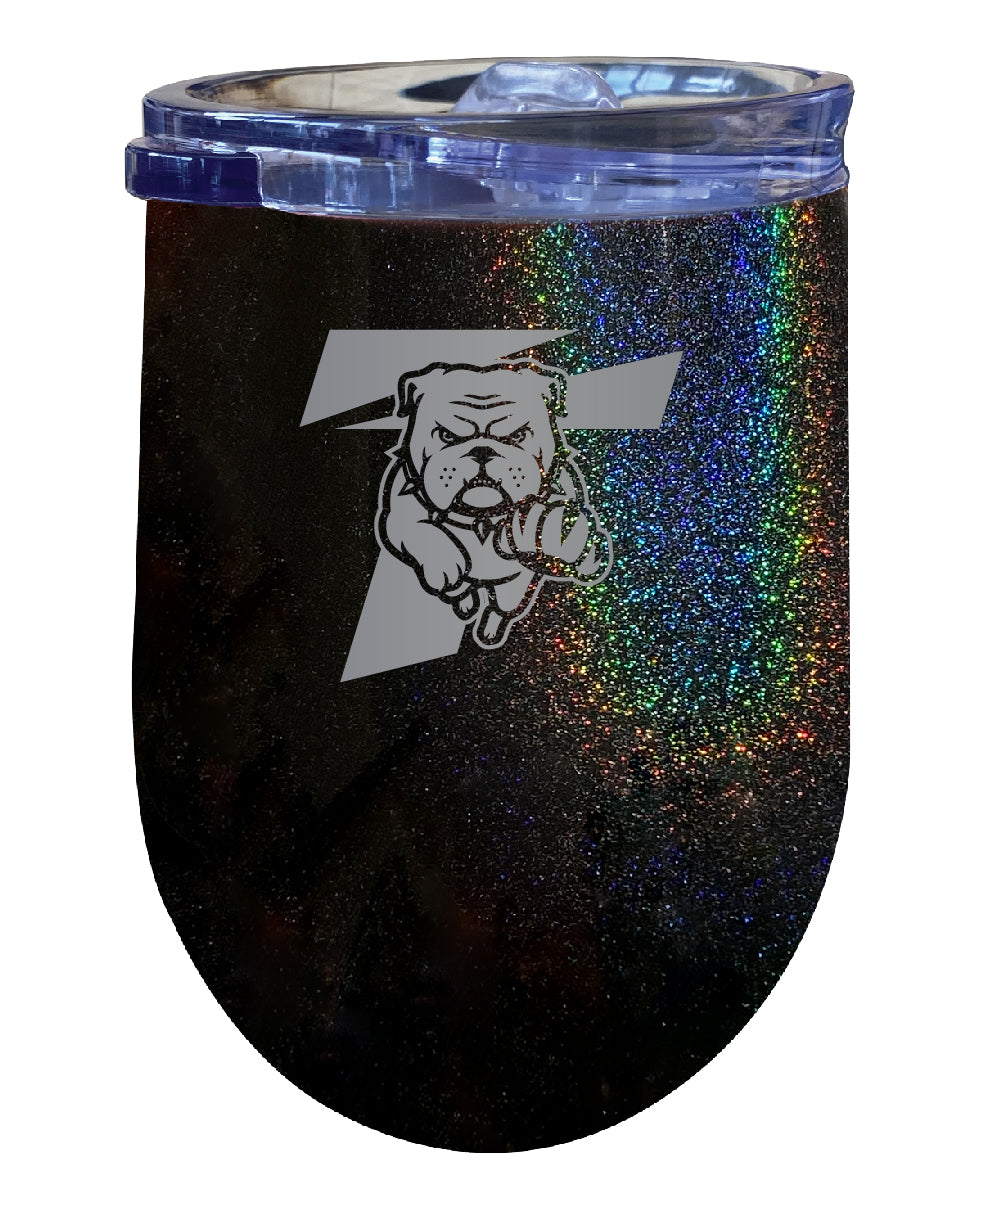 Truman State University NCAA Laser-Etched Wine Tumbler - 12oz Rainbow Glitter Black Stainless Steel Insulated Cup